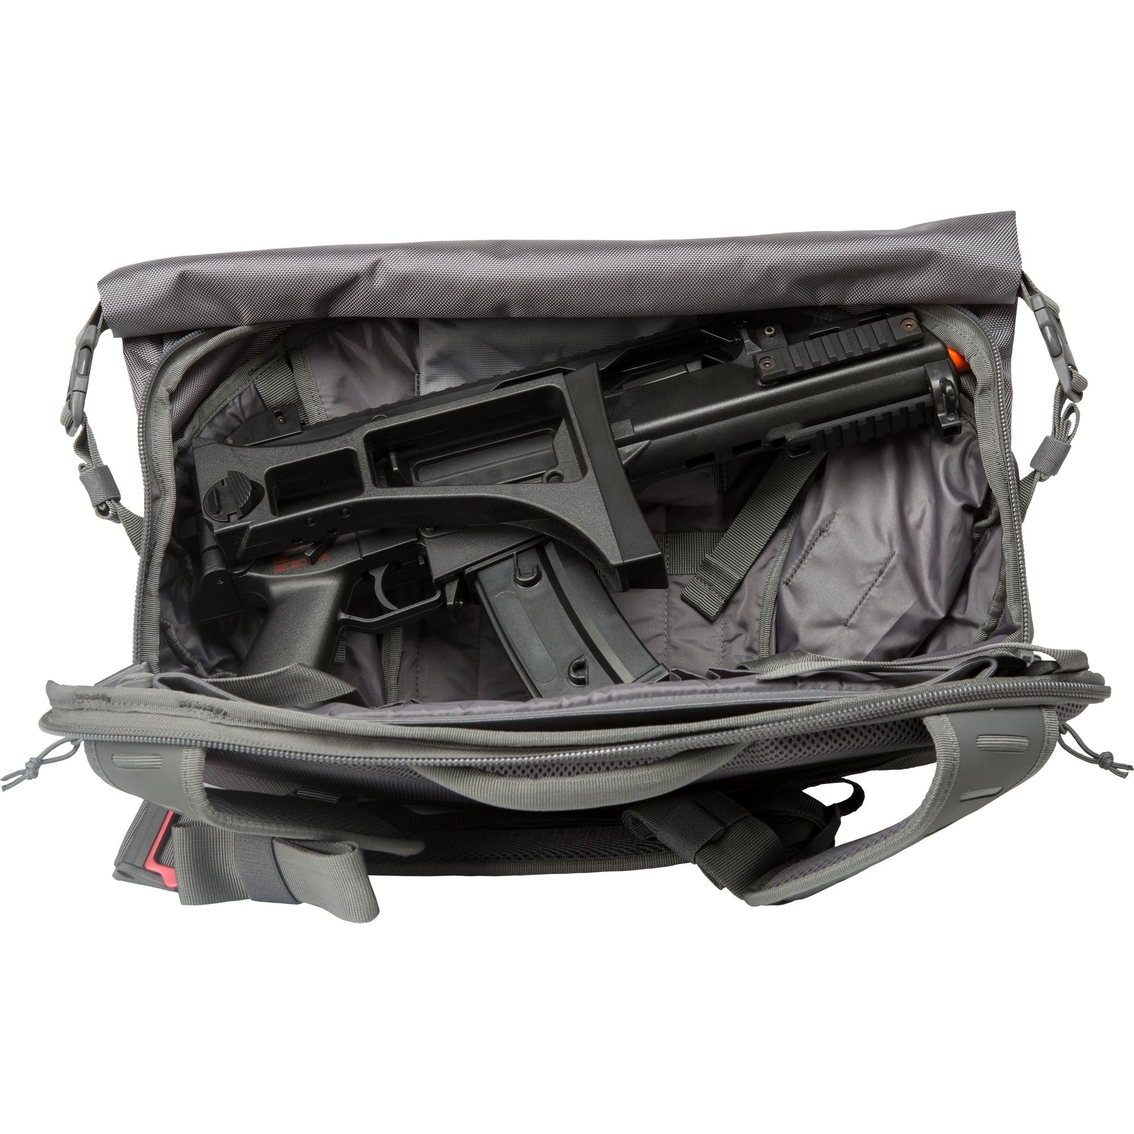 Tundra color NEW 5.11 Tactical Covert Box Messenger Bag Case Pouch Pack 